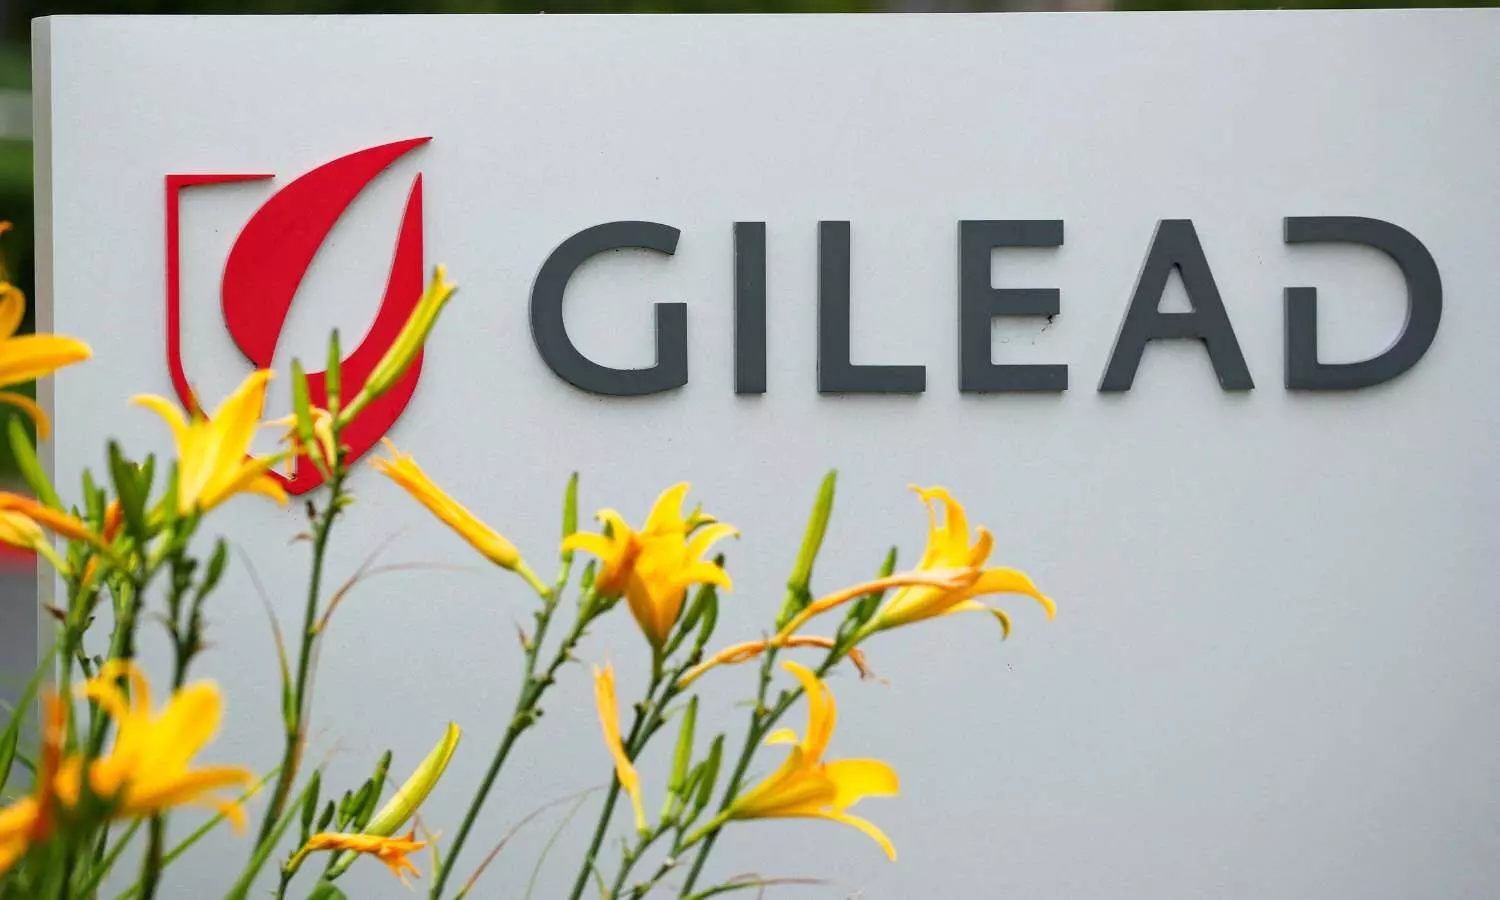 Gilead Sciences Trodelvy, Keytruda combo study demonstrates promising clinical activity in first-line Metastatic Non-Small Cell Lung Cancer